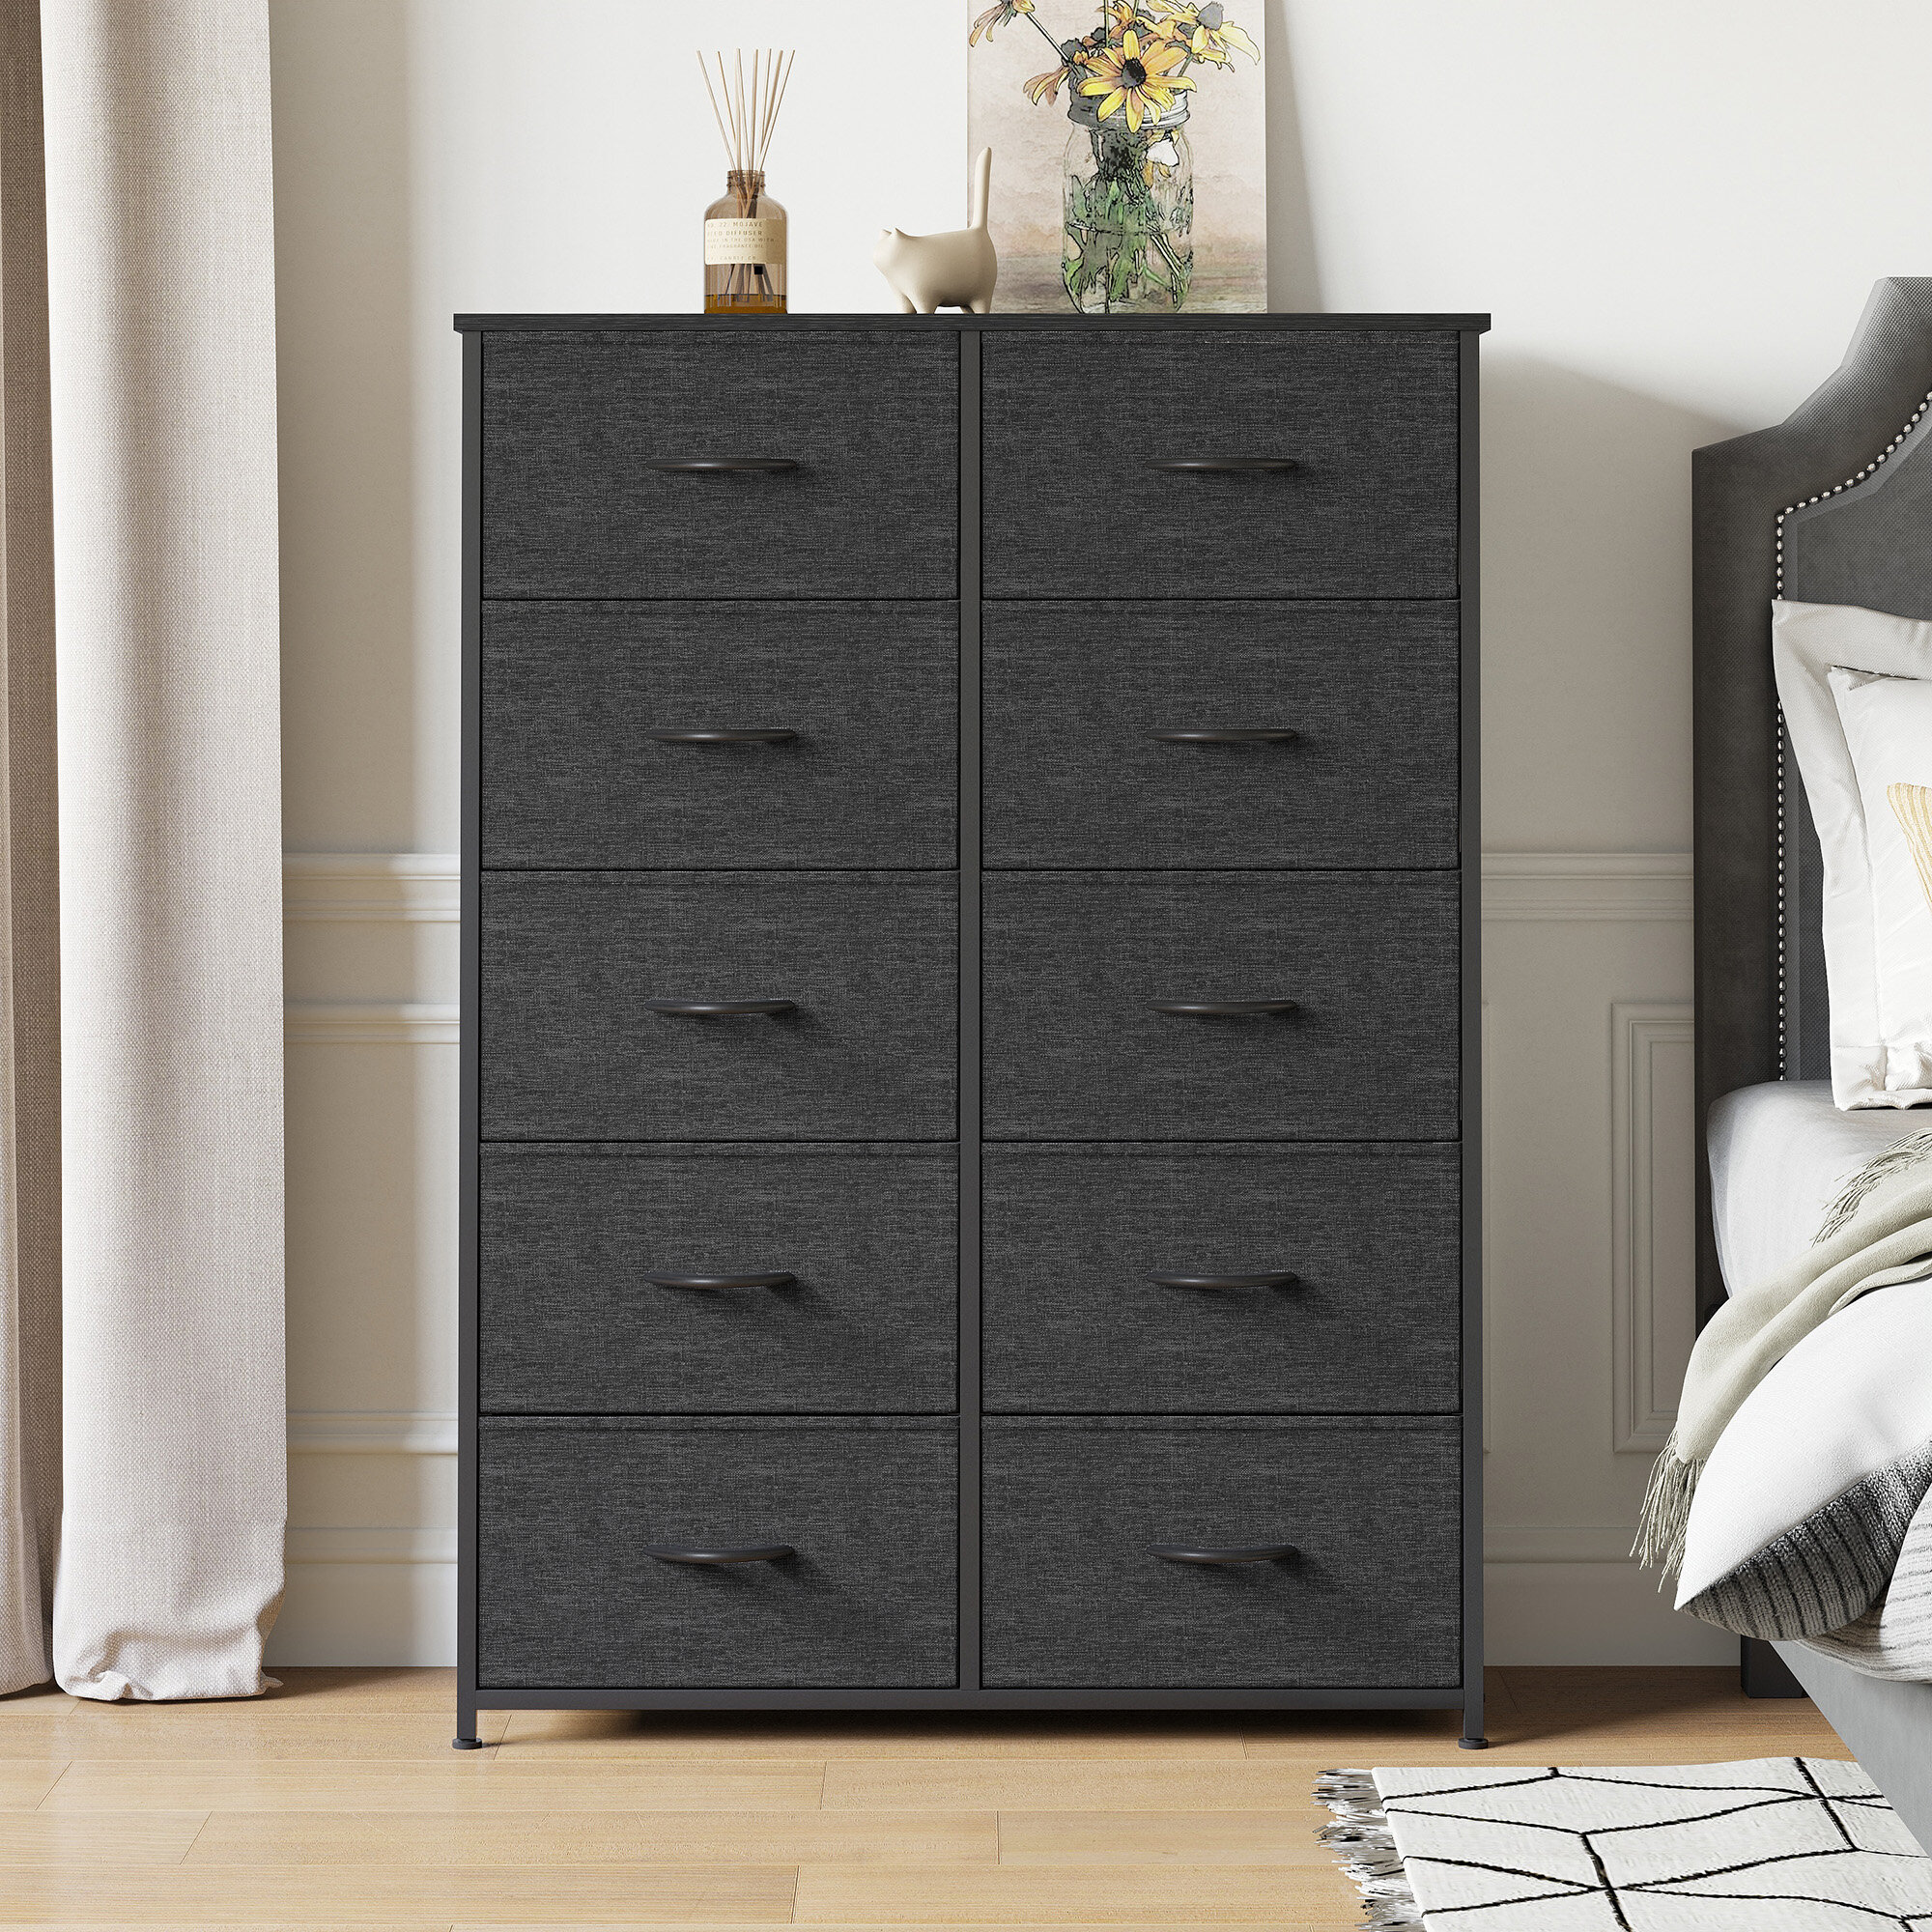 Ebern Designs Ojaswi 8 Dresser, Chest of Drawers with Wood Top & Reviews -  Wayfair Canada